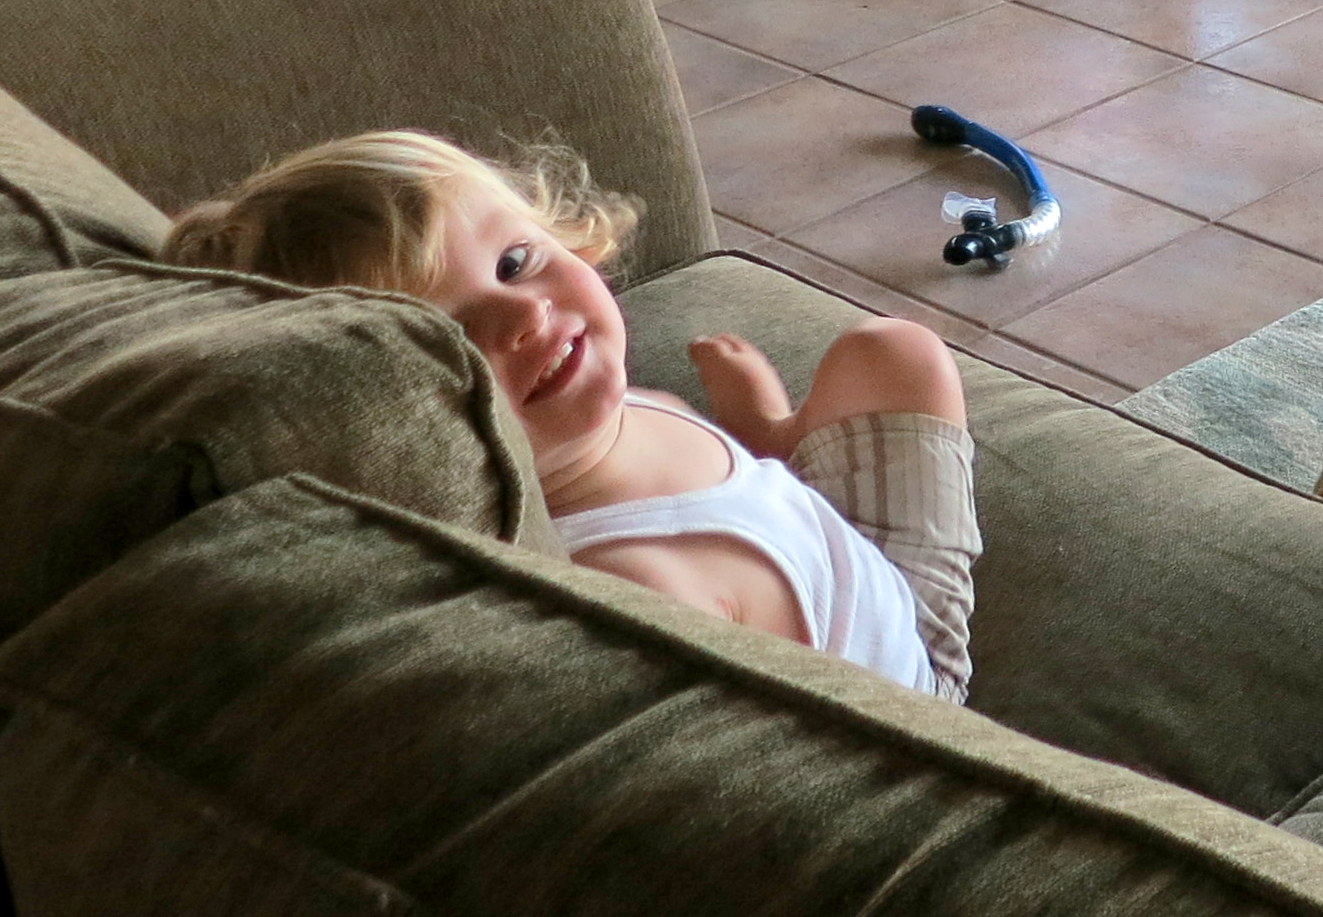 a  playing with a remote control in her hand